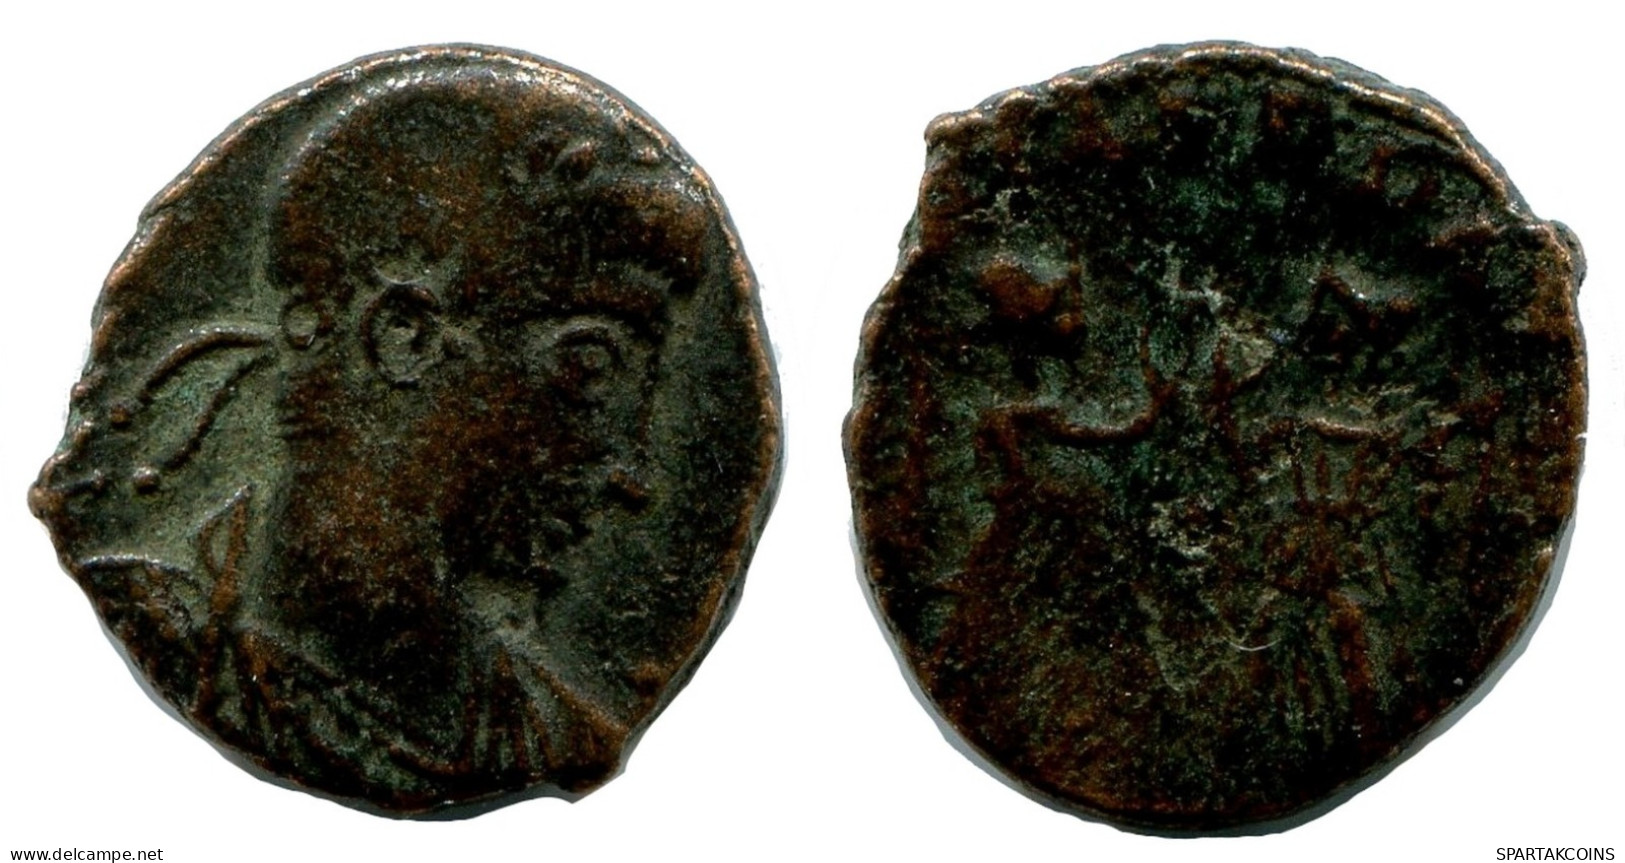 CONSTANTIUS II MINT UNCERTAIN FOUND IN IHNASYAH HOARD EGYPT #ANC10125.14.E.A - The Christian Empire (307 AD To 363 AD)